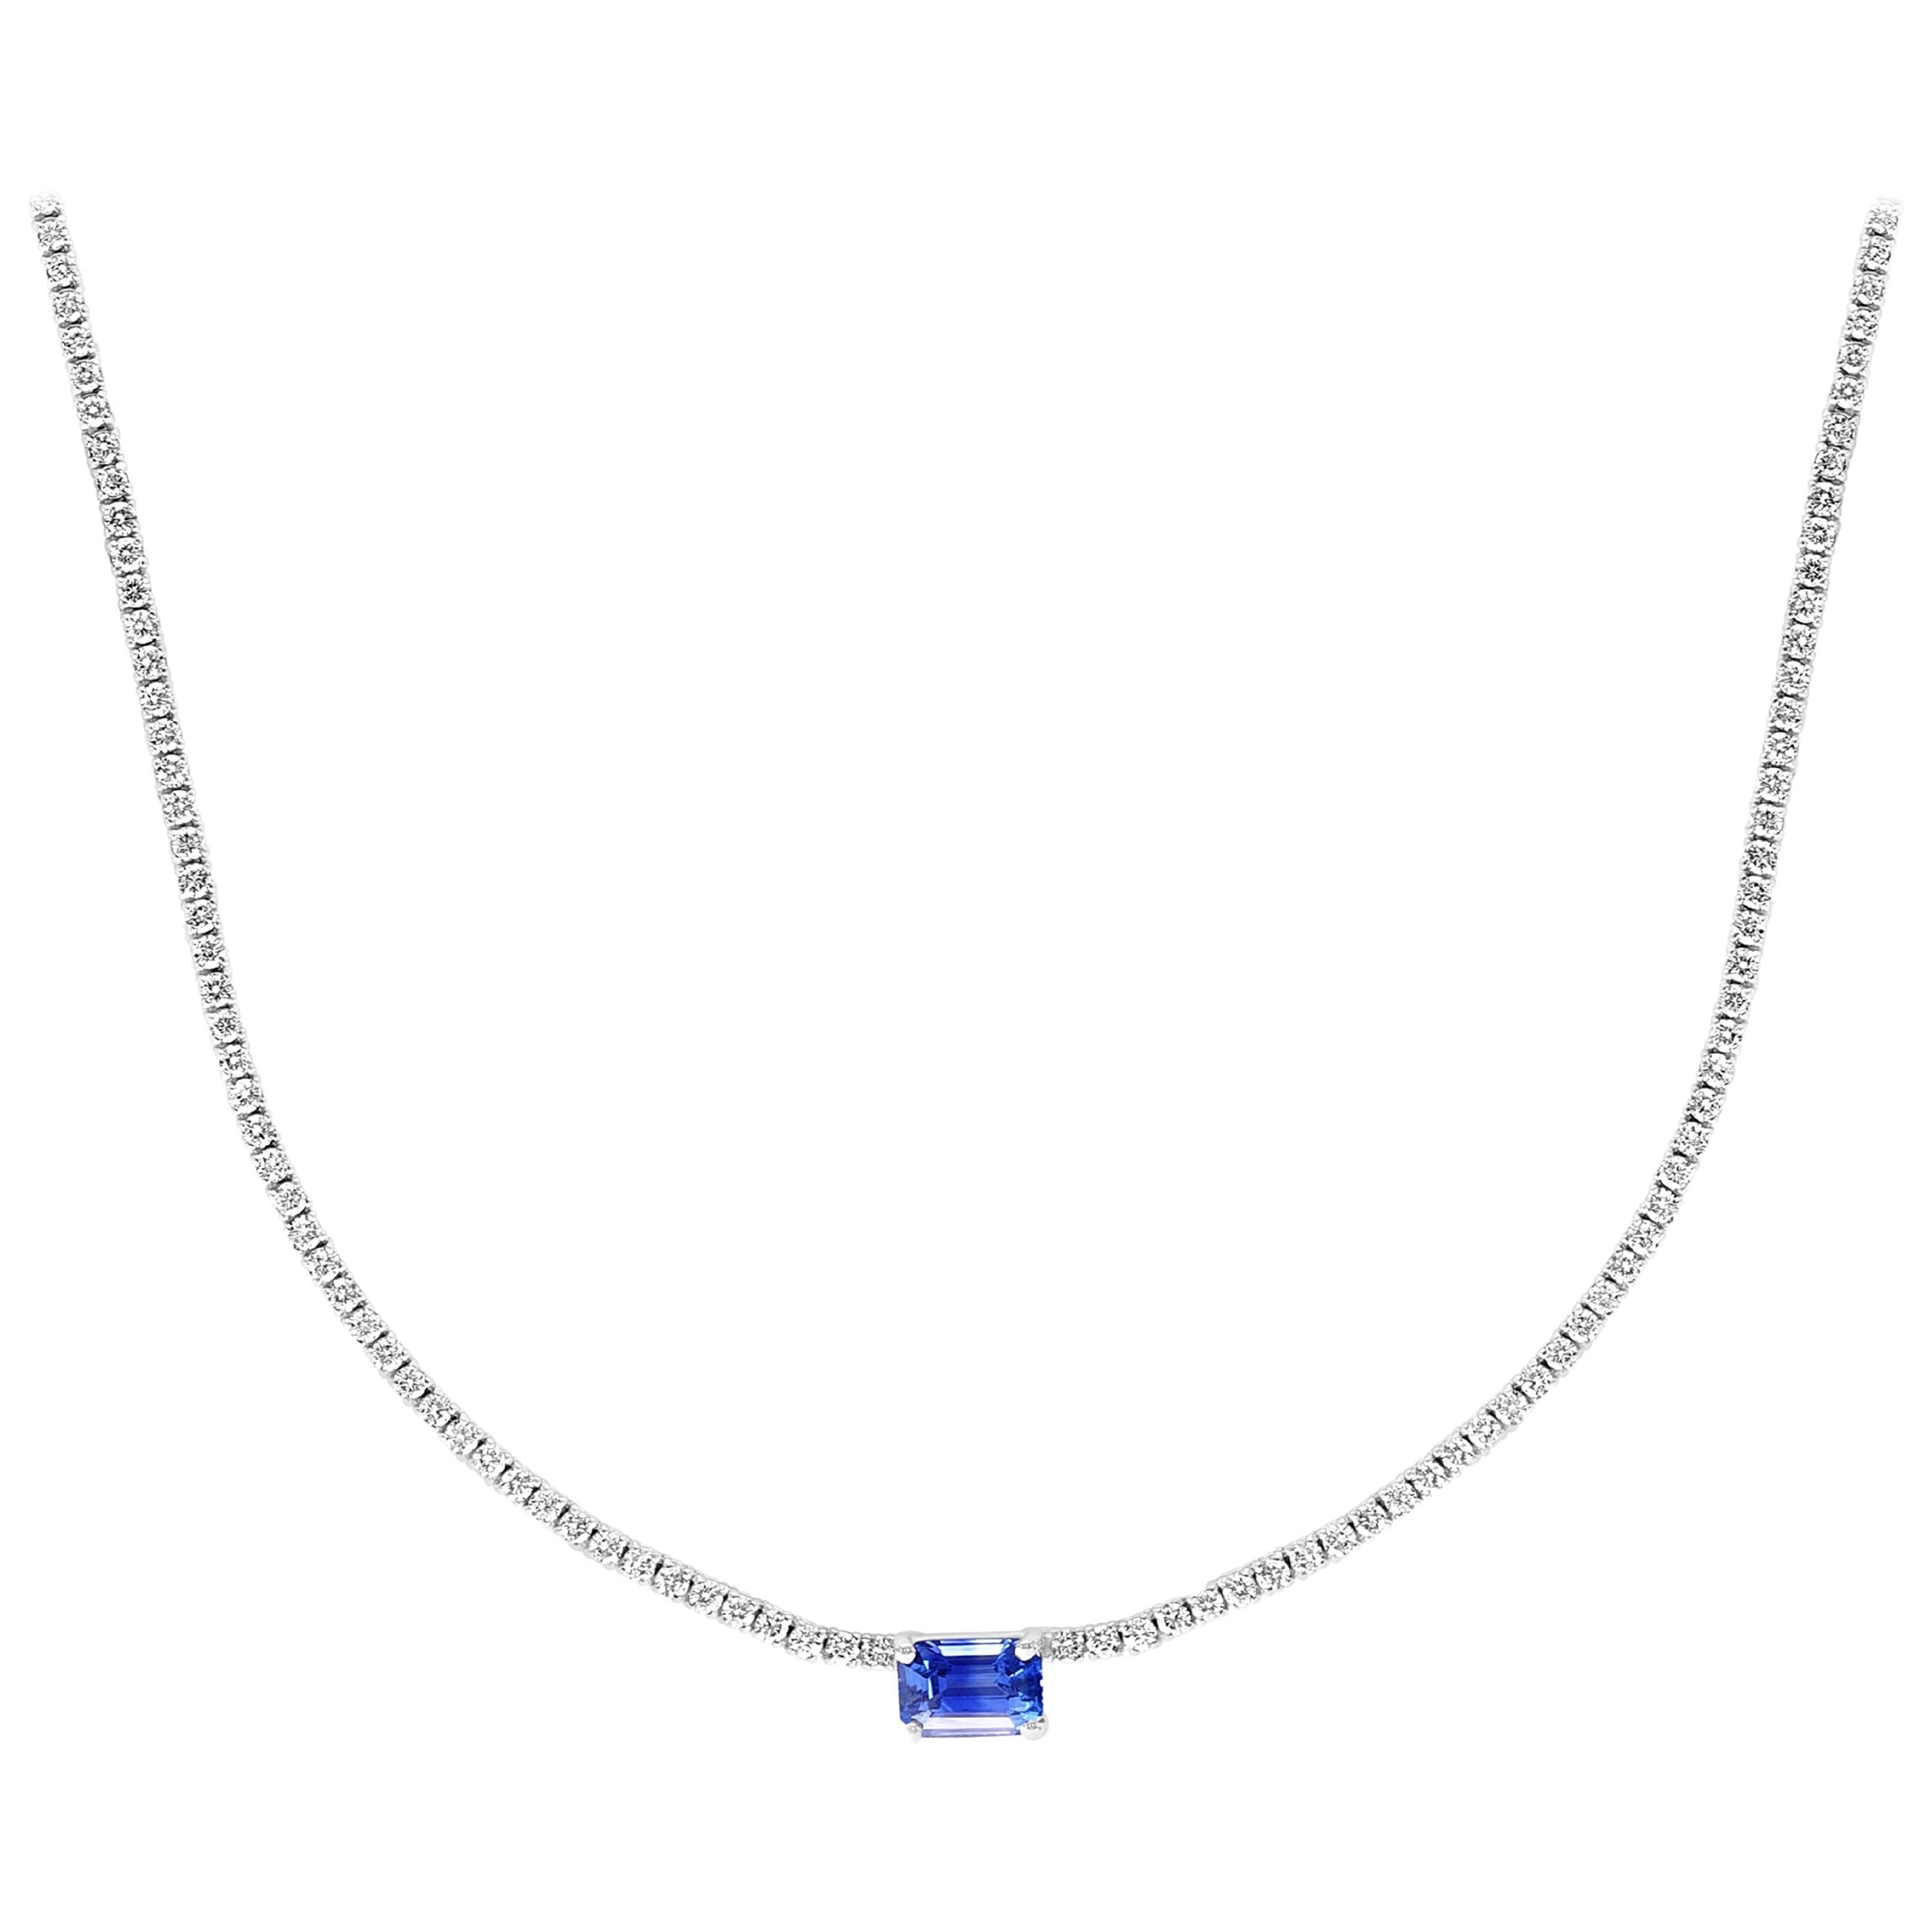 1.49 Carat Emerald cut Sapphire and Diamond Tennis Necklace in 14K White Gold For Sale